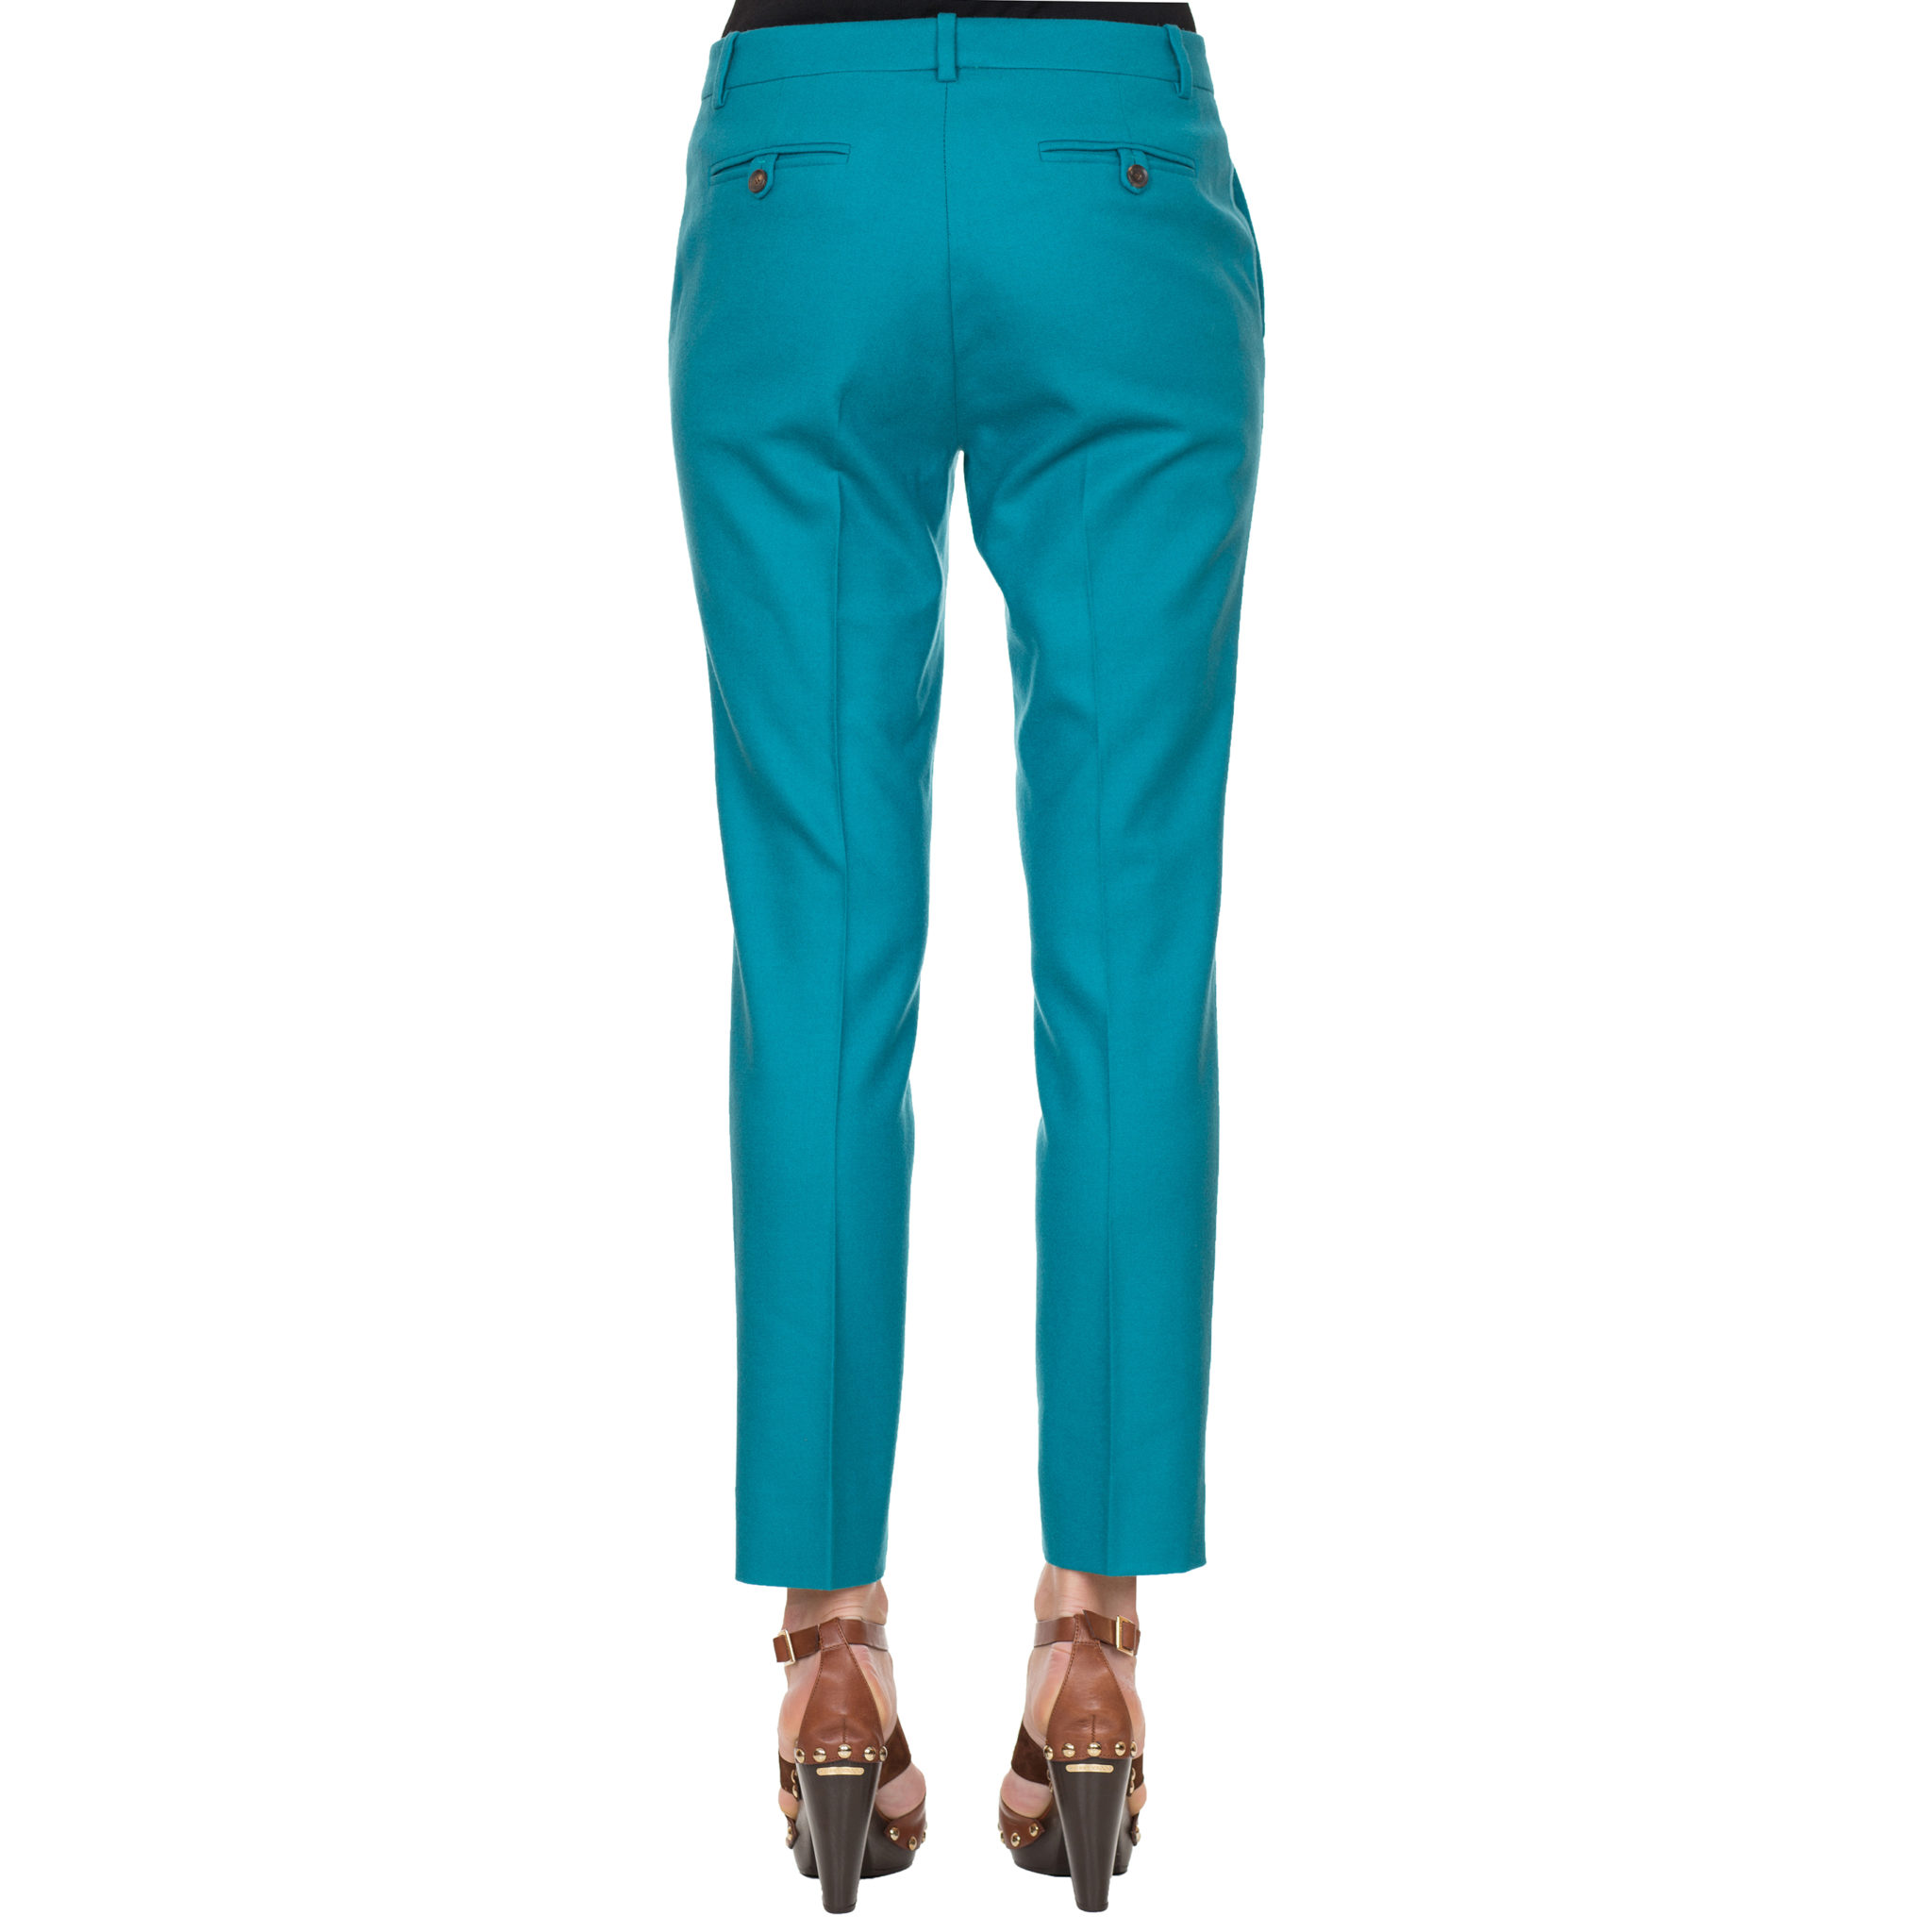 woocommerce-673321-2209615.cloudwaysapps.com-gucci-womens-turquoise-blue-wool-cashmere-stretch-flannel-holiday-pants